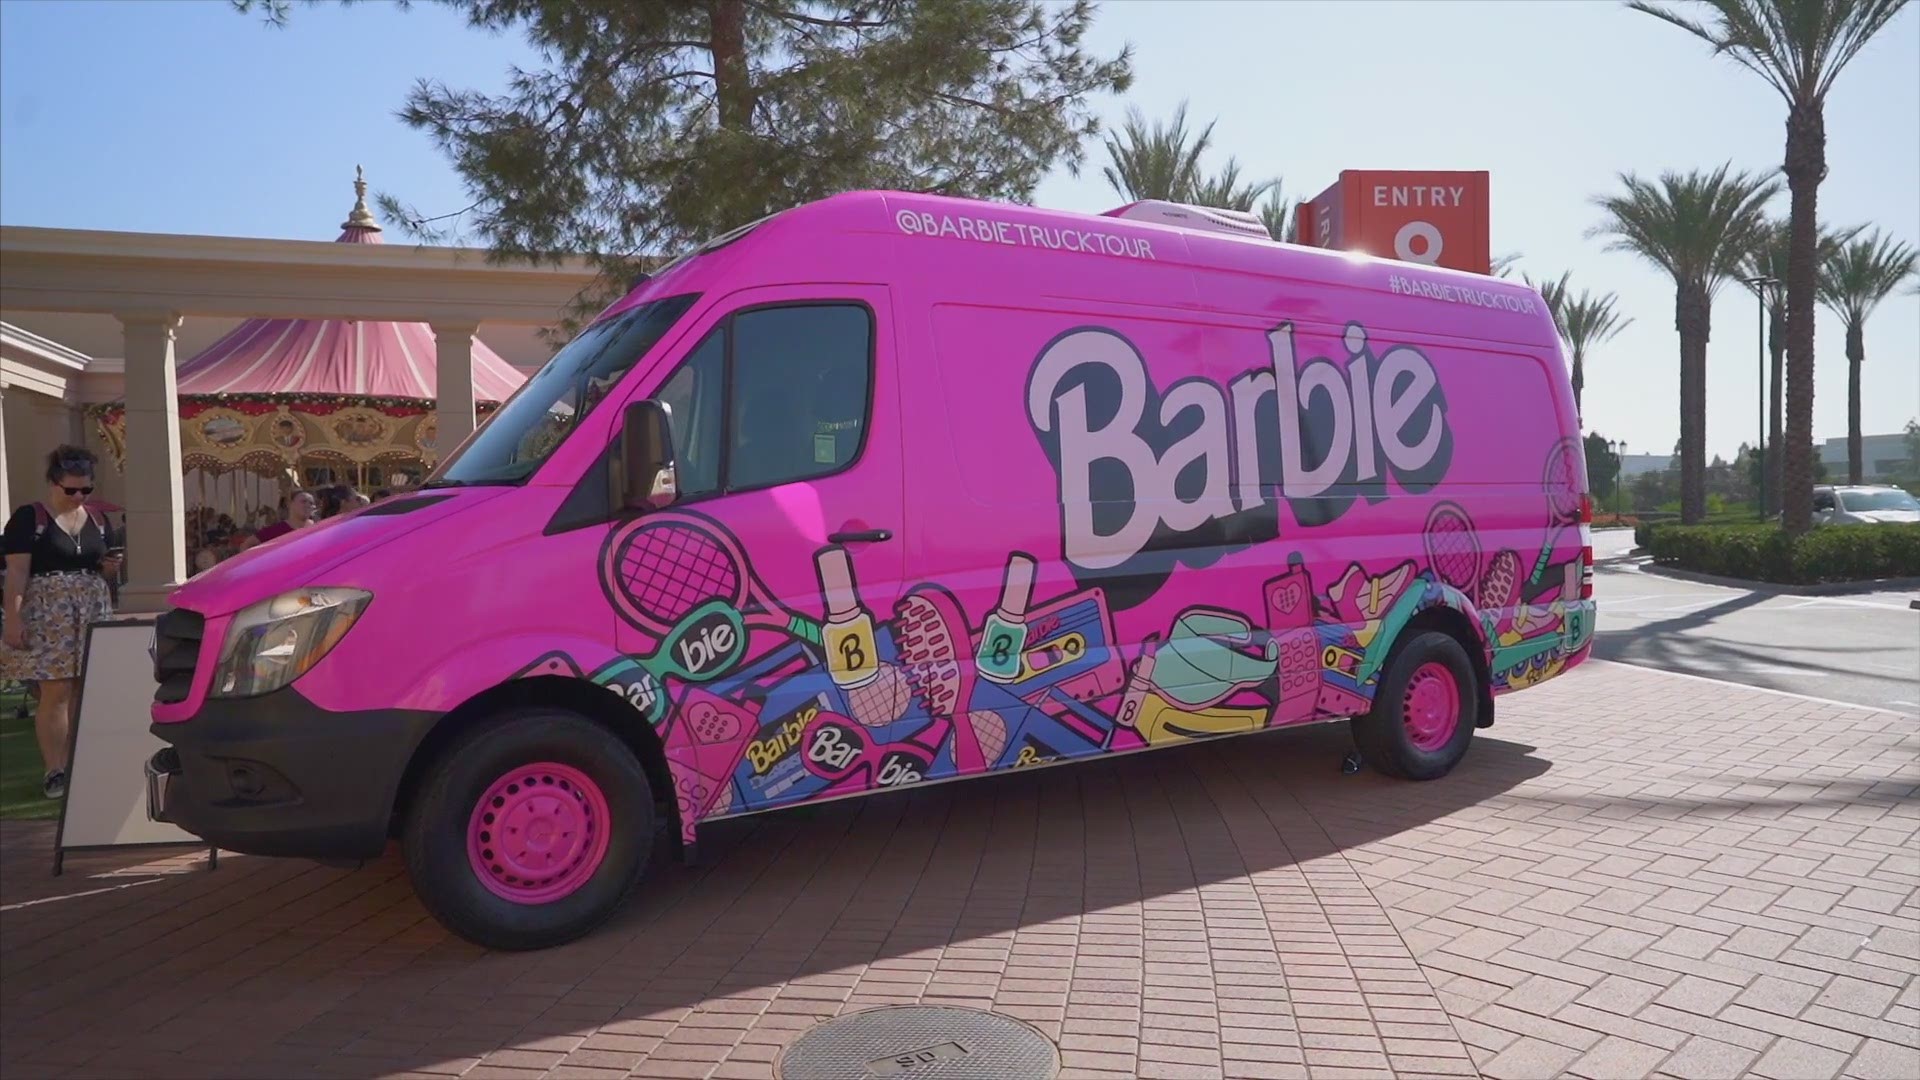 Popup Barbie truck coming to St. Louis County